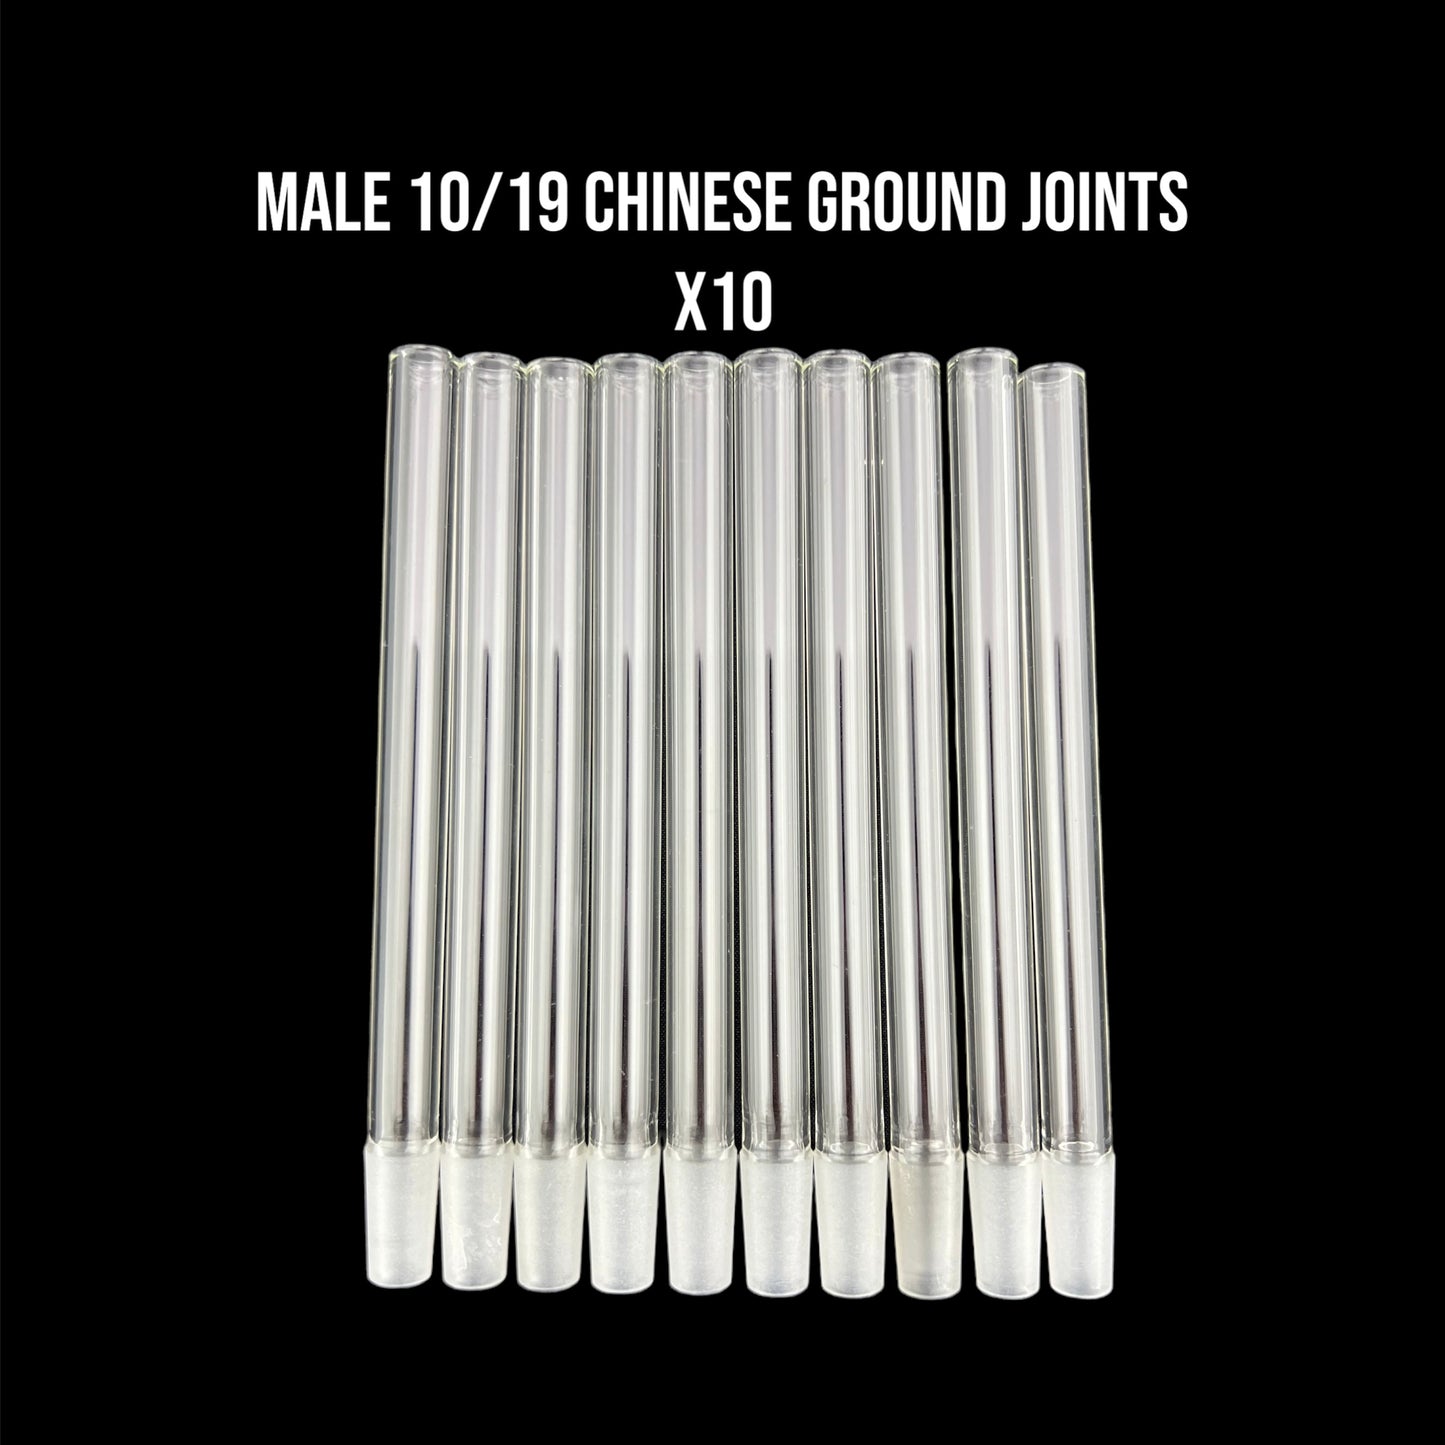 10mm Male Chinese Ground Joints - 10/19 Glass on Glass Fitting- Borosilicate Glass - COE 33